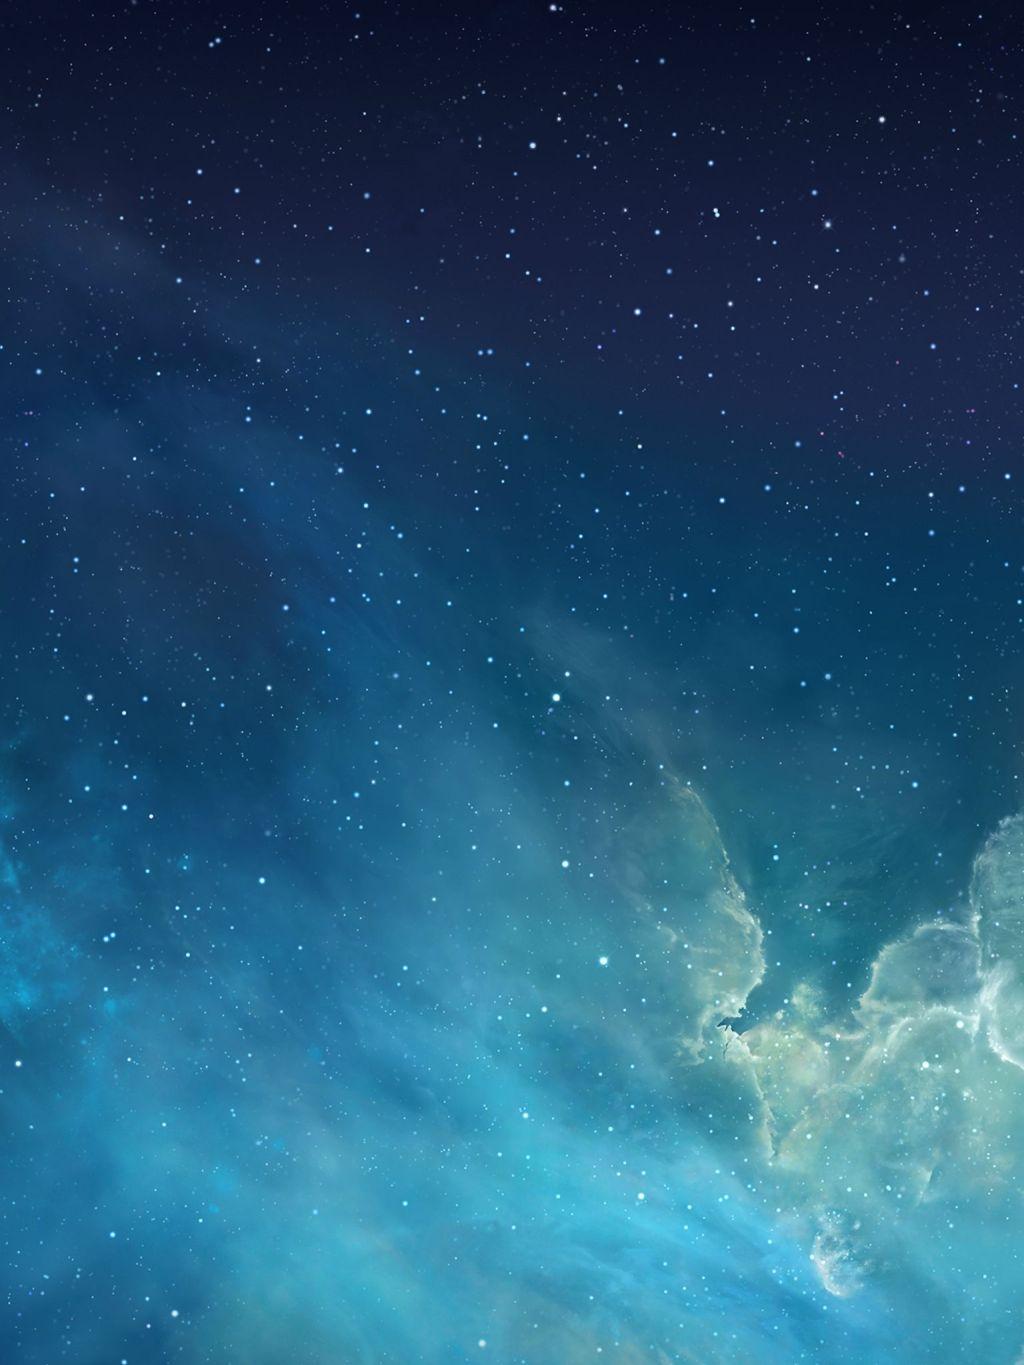 Download iOS starry wallpapers IWallpapers